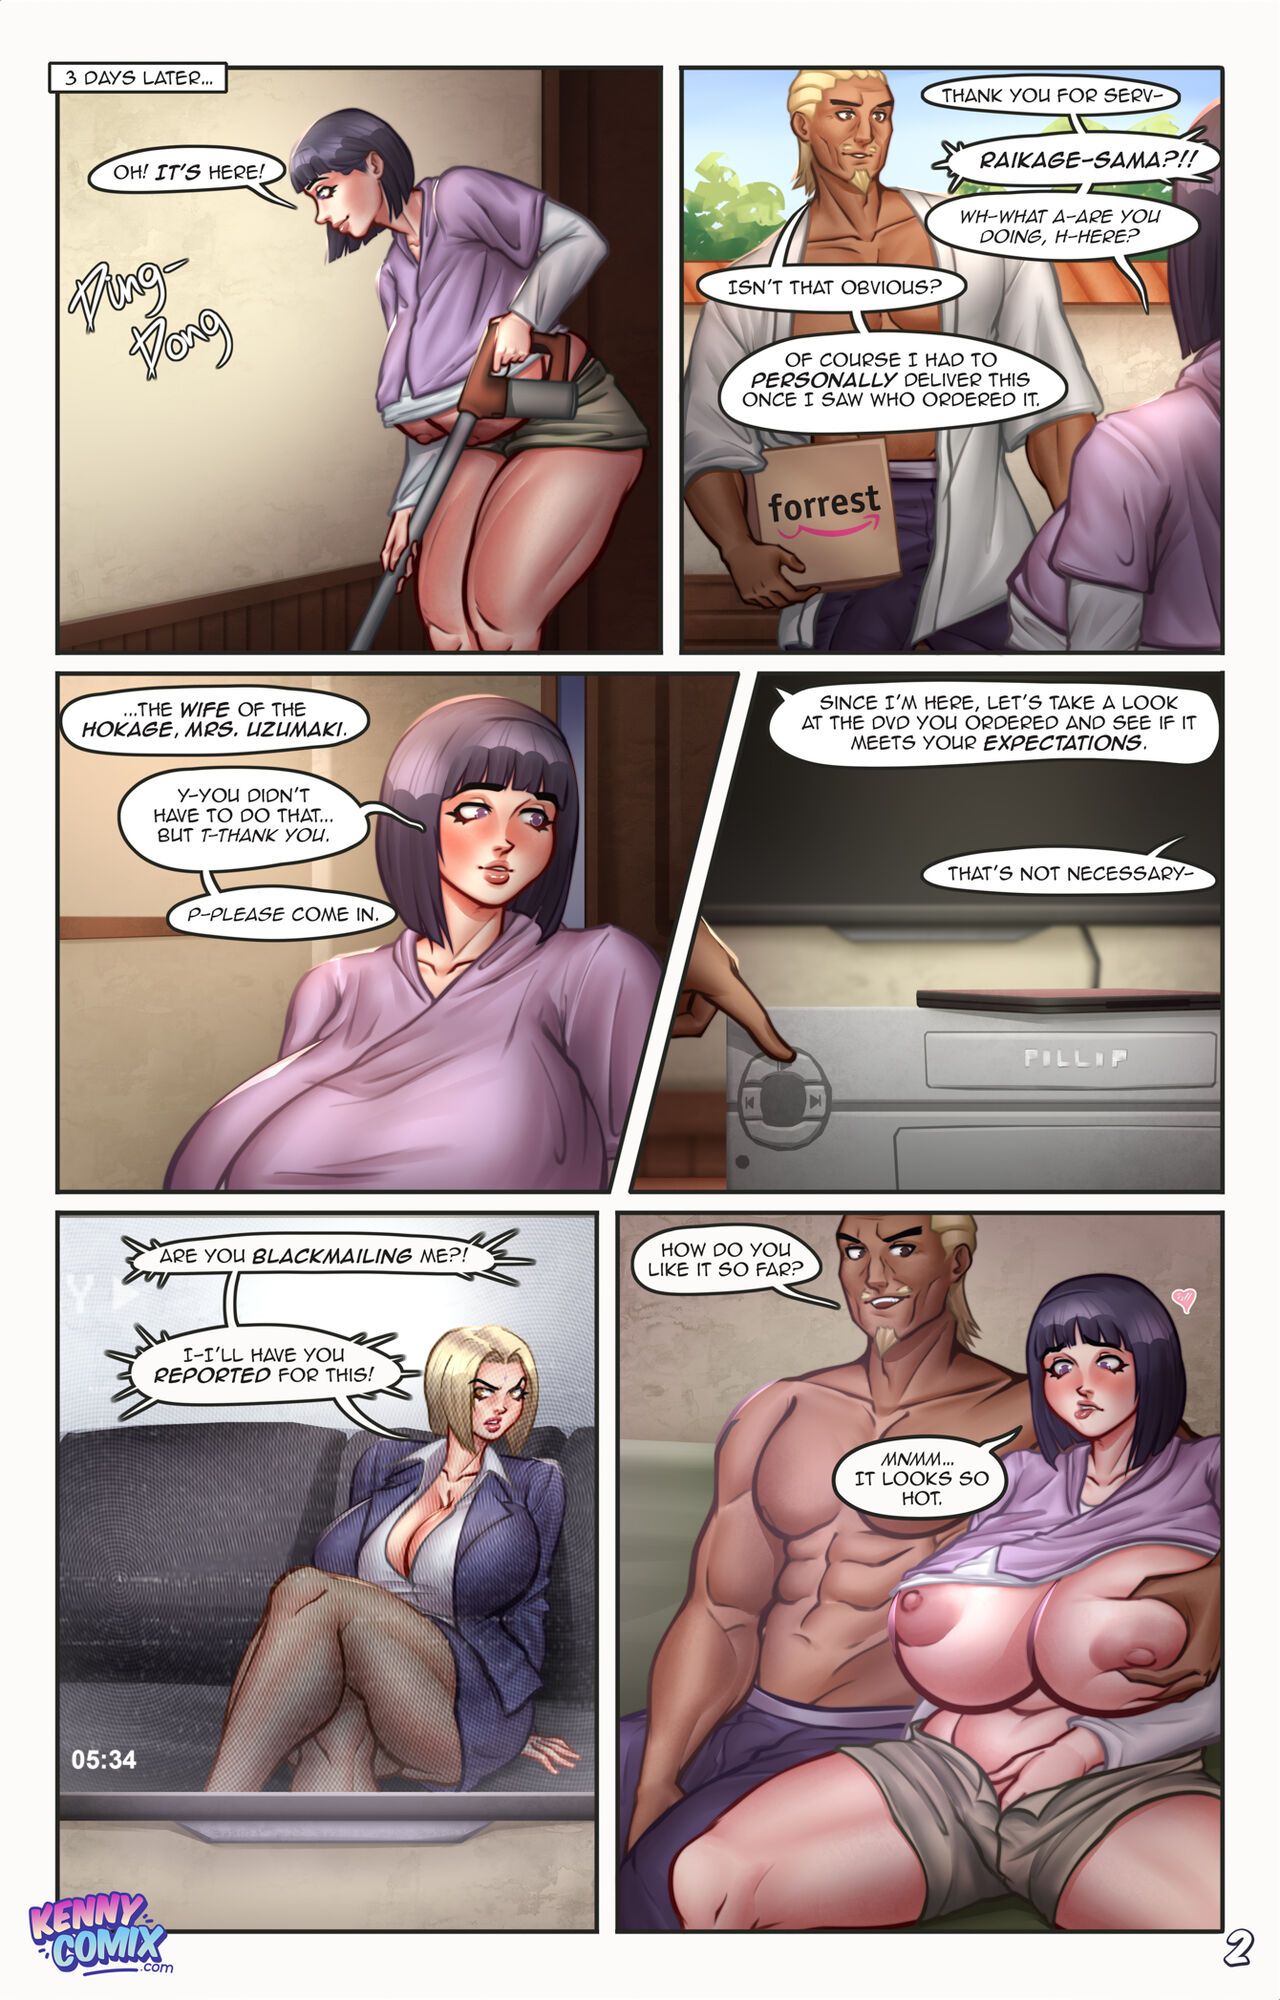 Special Delivery by Kennycomix Porn Comic english 04